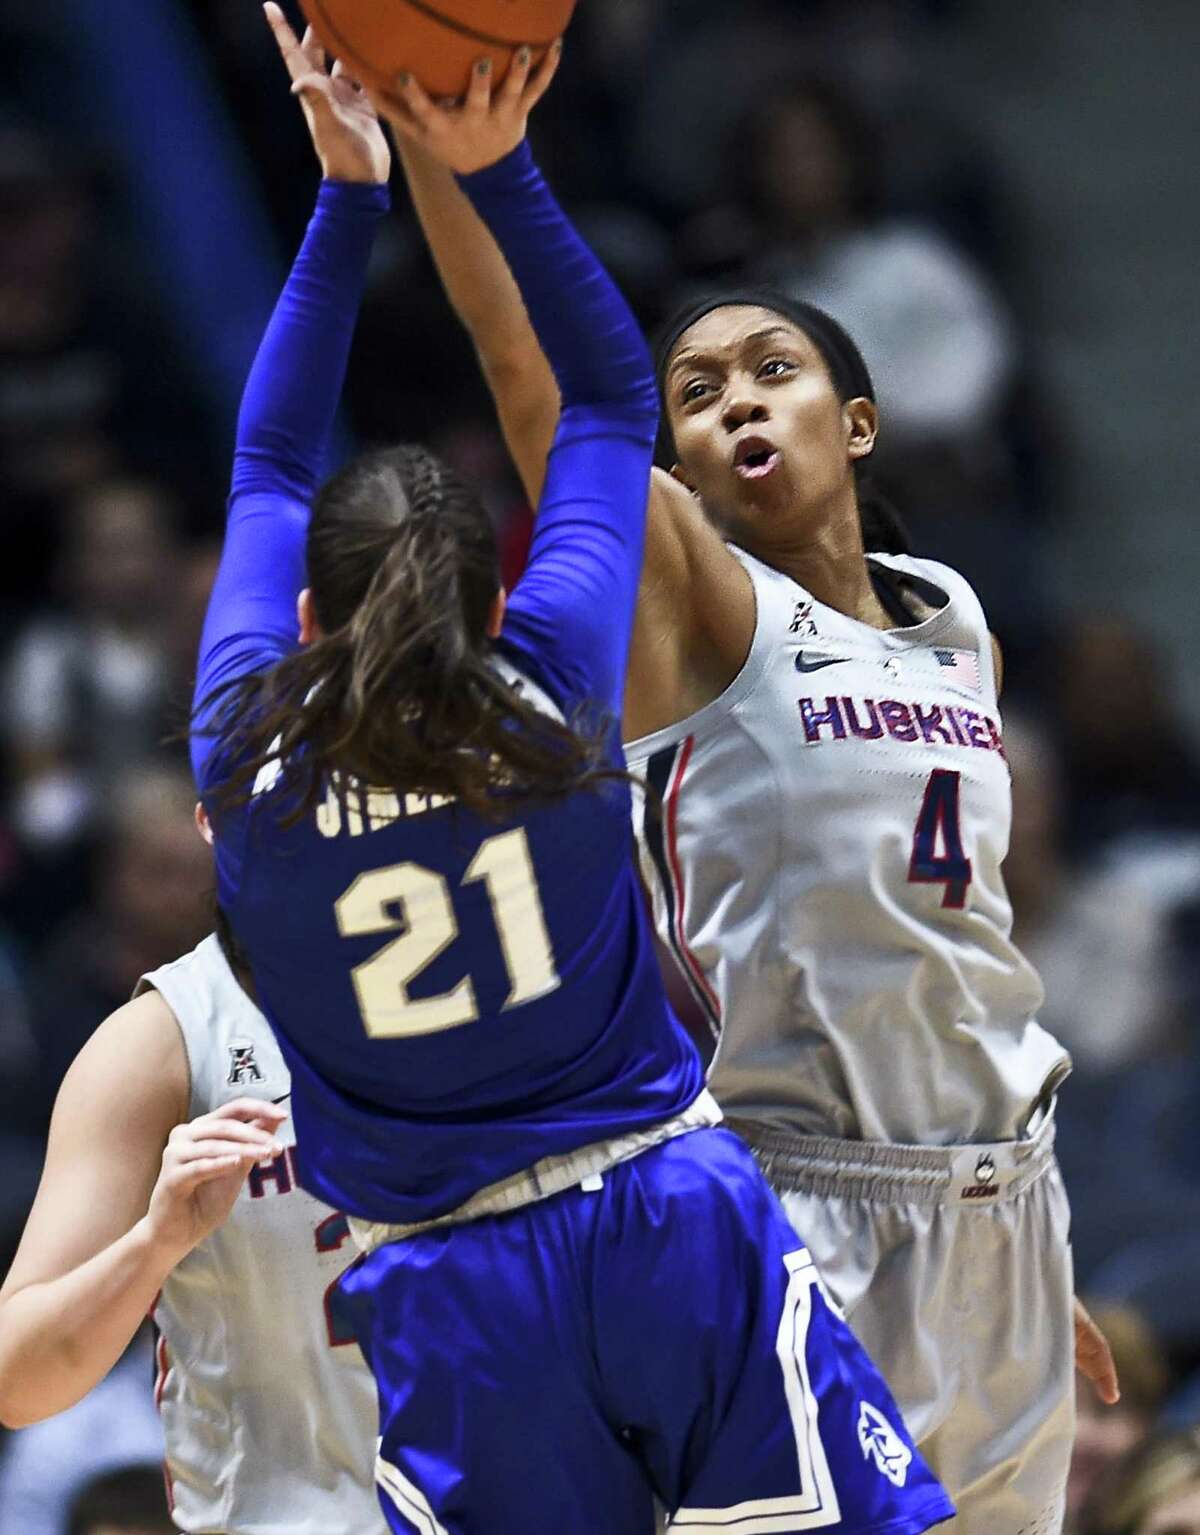 Connecticut’s Mikayla Coombs (4) blocks a shot against Seton Hall’s Nicole Jimenez (21) in the second half on Saturday in Hartford. UConn won 99-61.